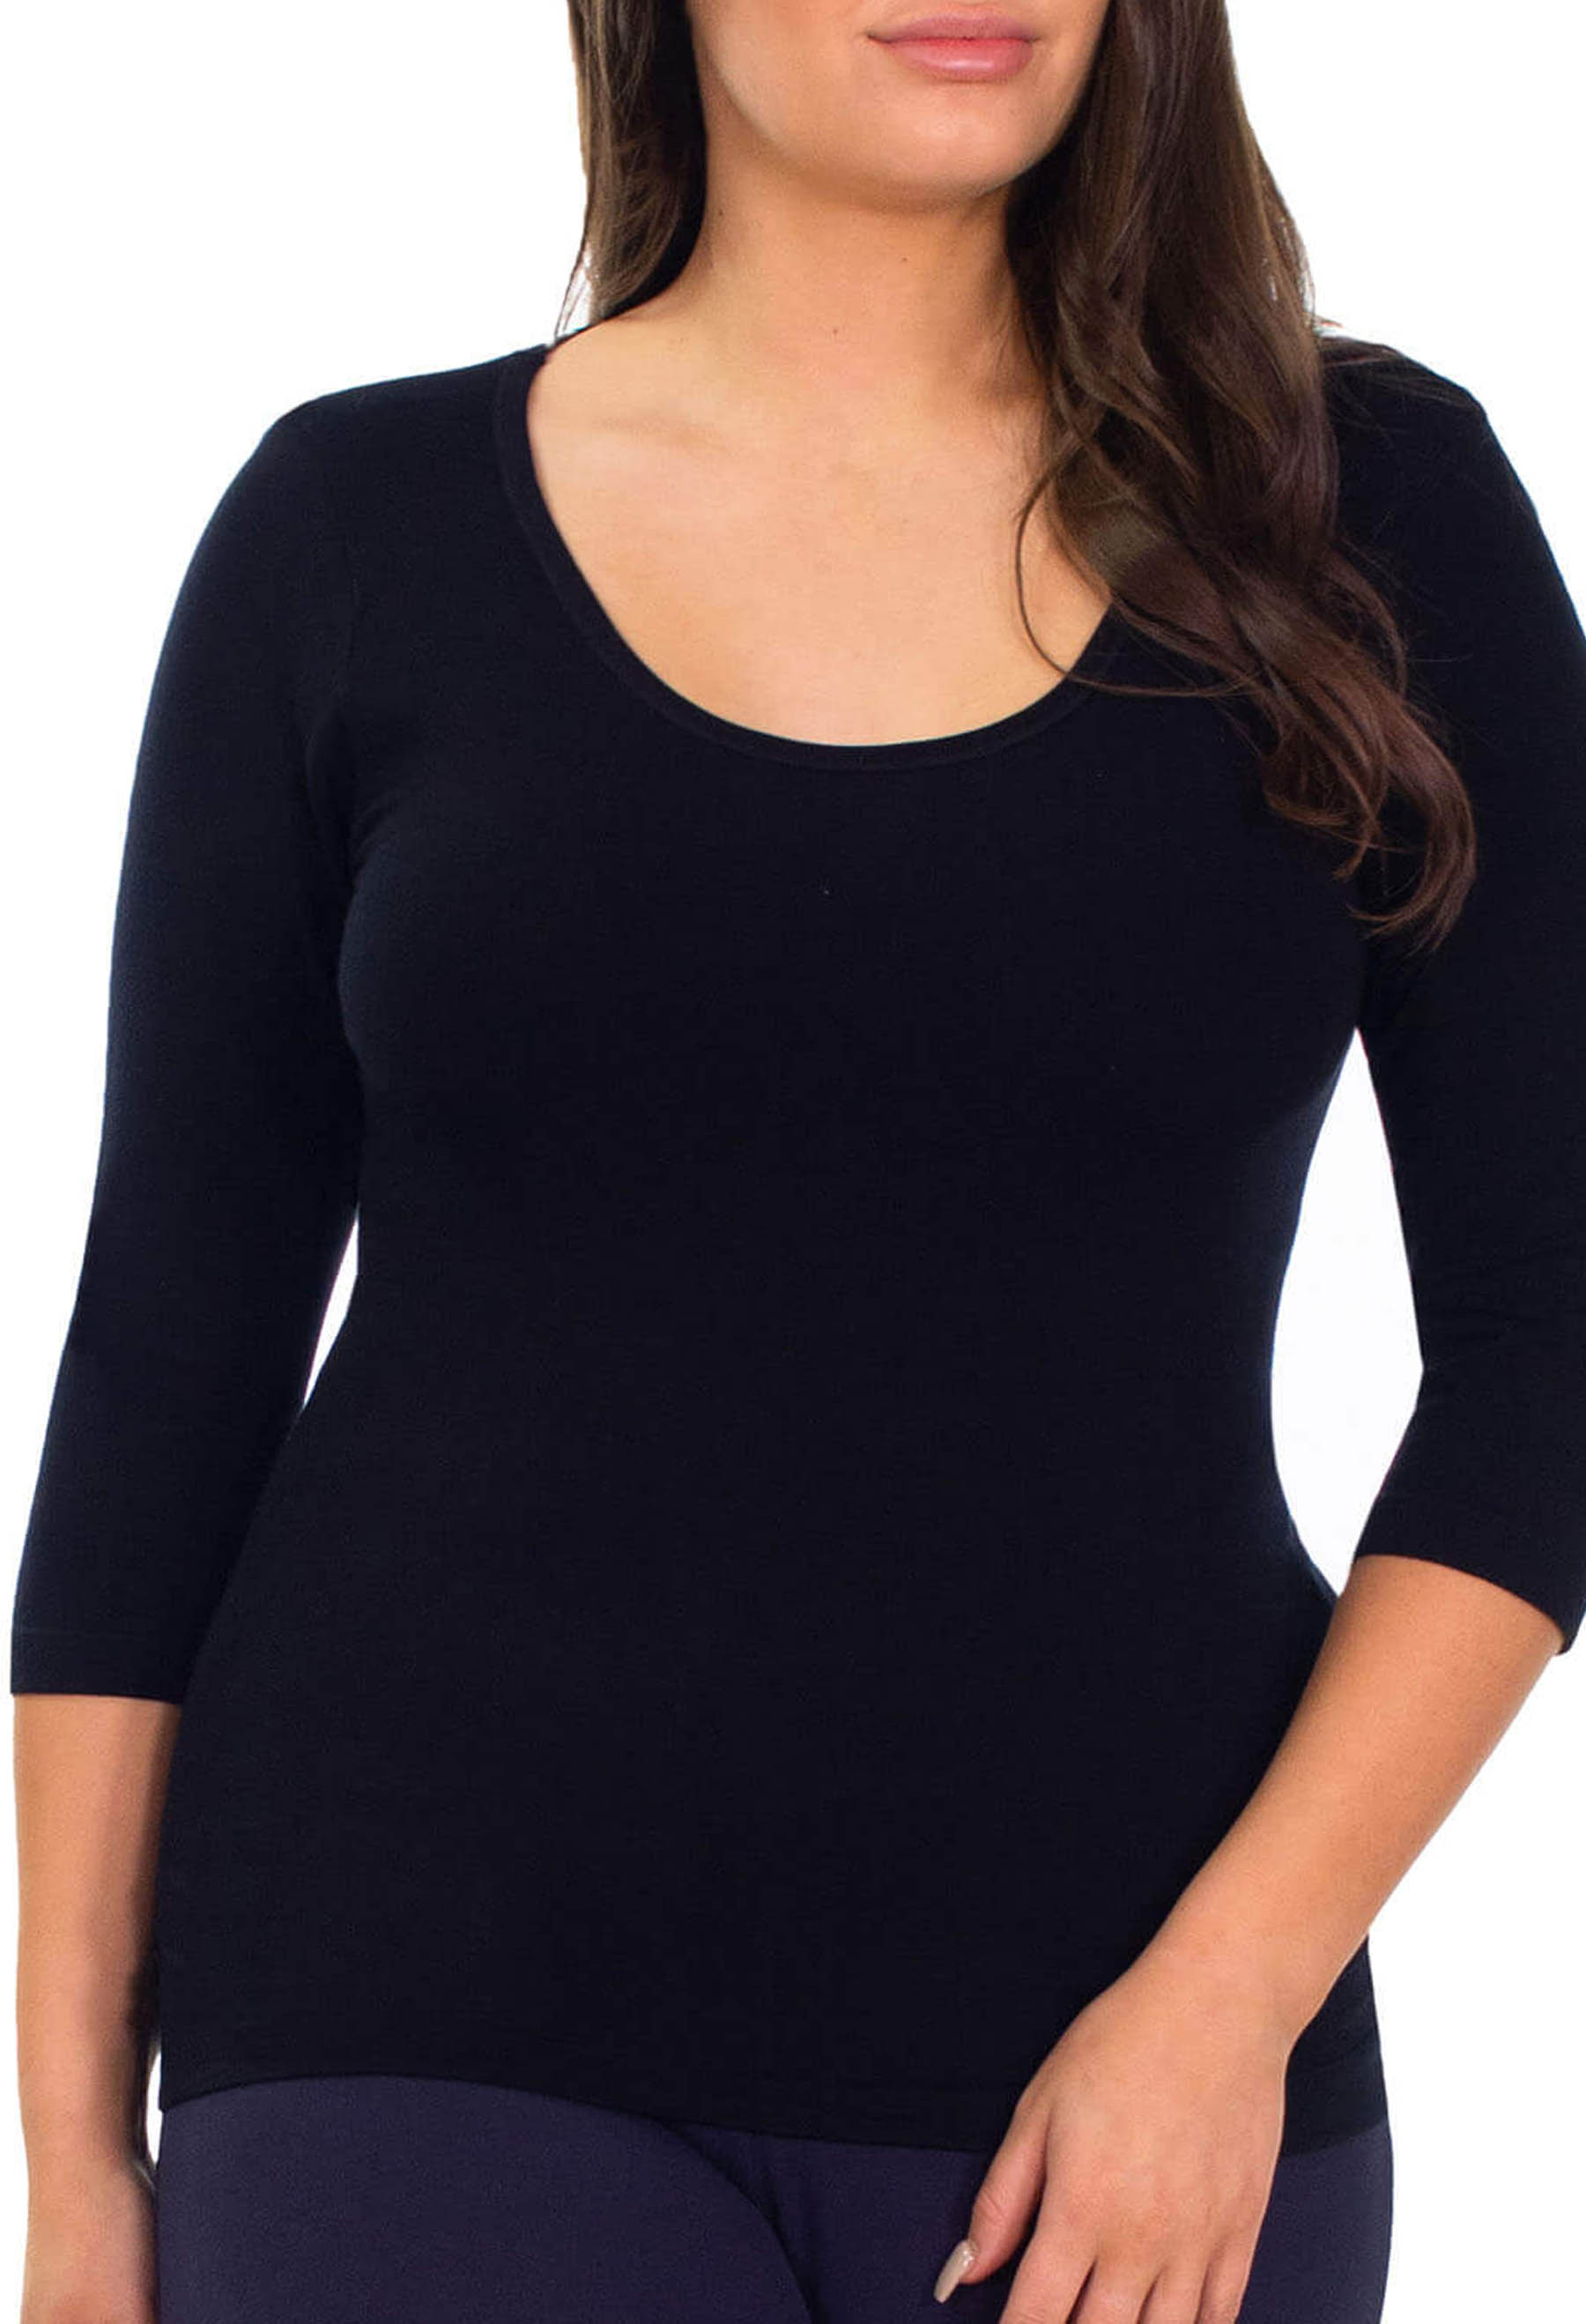 Curvy Bamboo 3/4 Sleeve Top - Silky Soft Bamboo, Embraces Curves